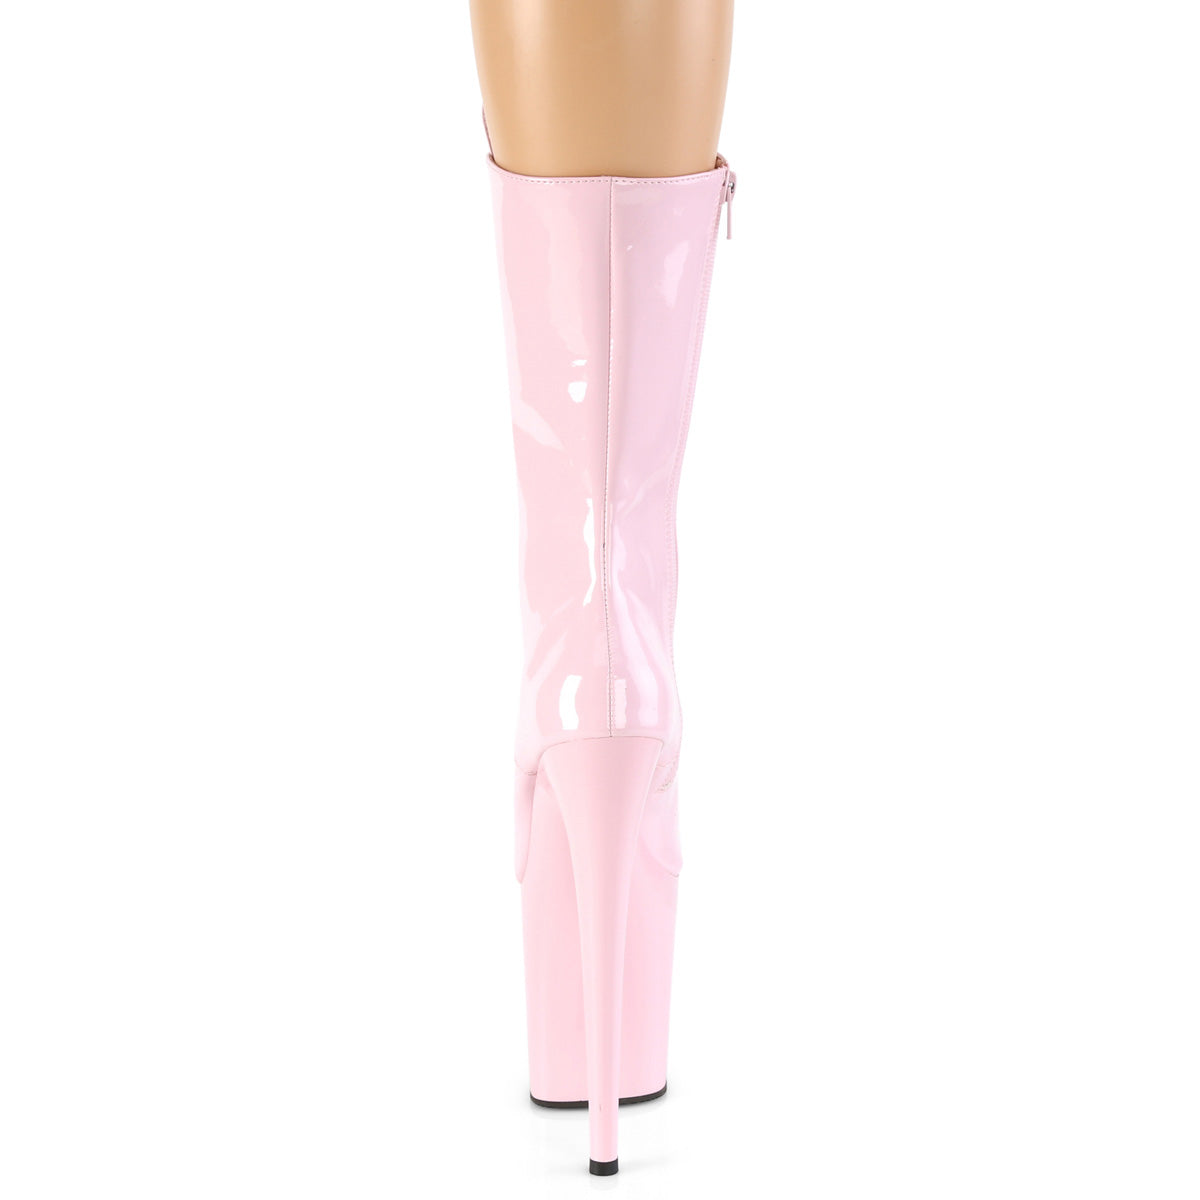 FLAMINGO-1050 Baby Pink Patent Mid-Calf Boot Pleaser